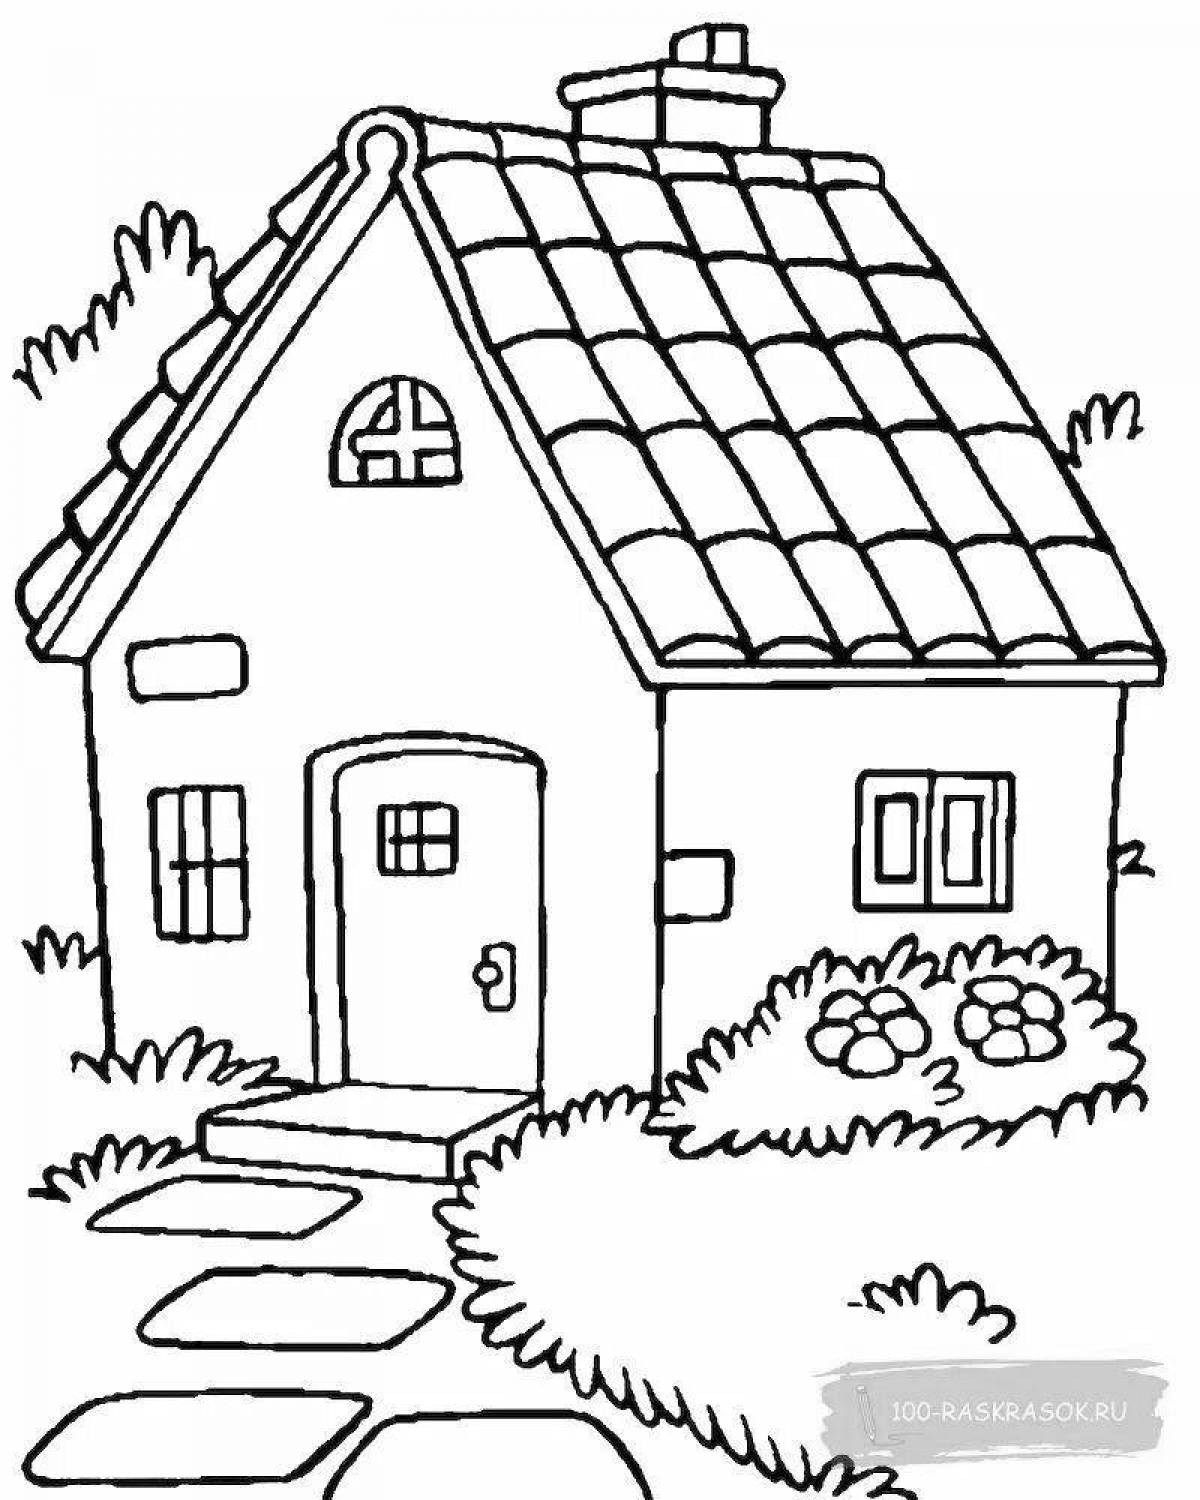 Coloring page magic village house for kids